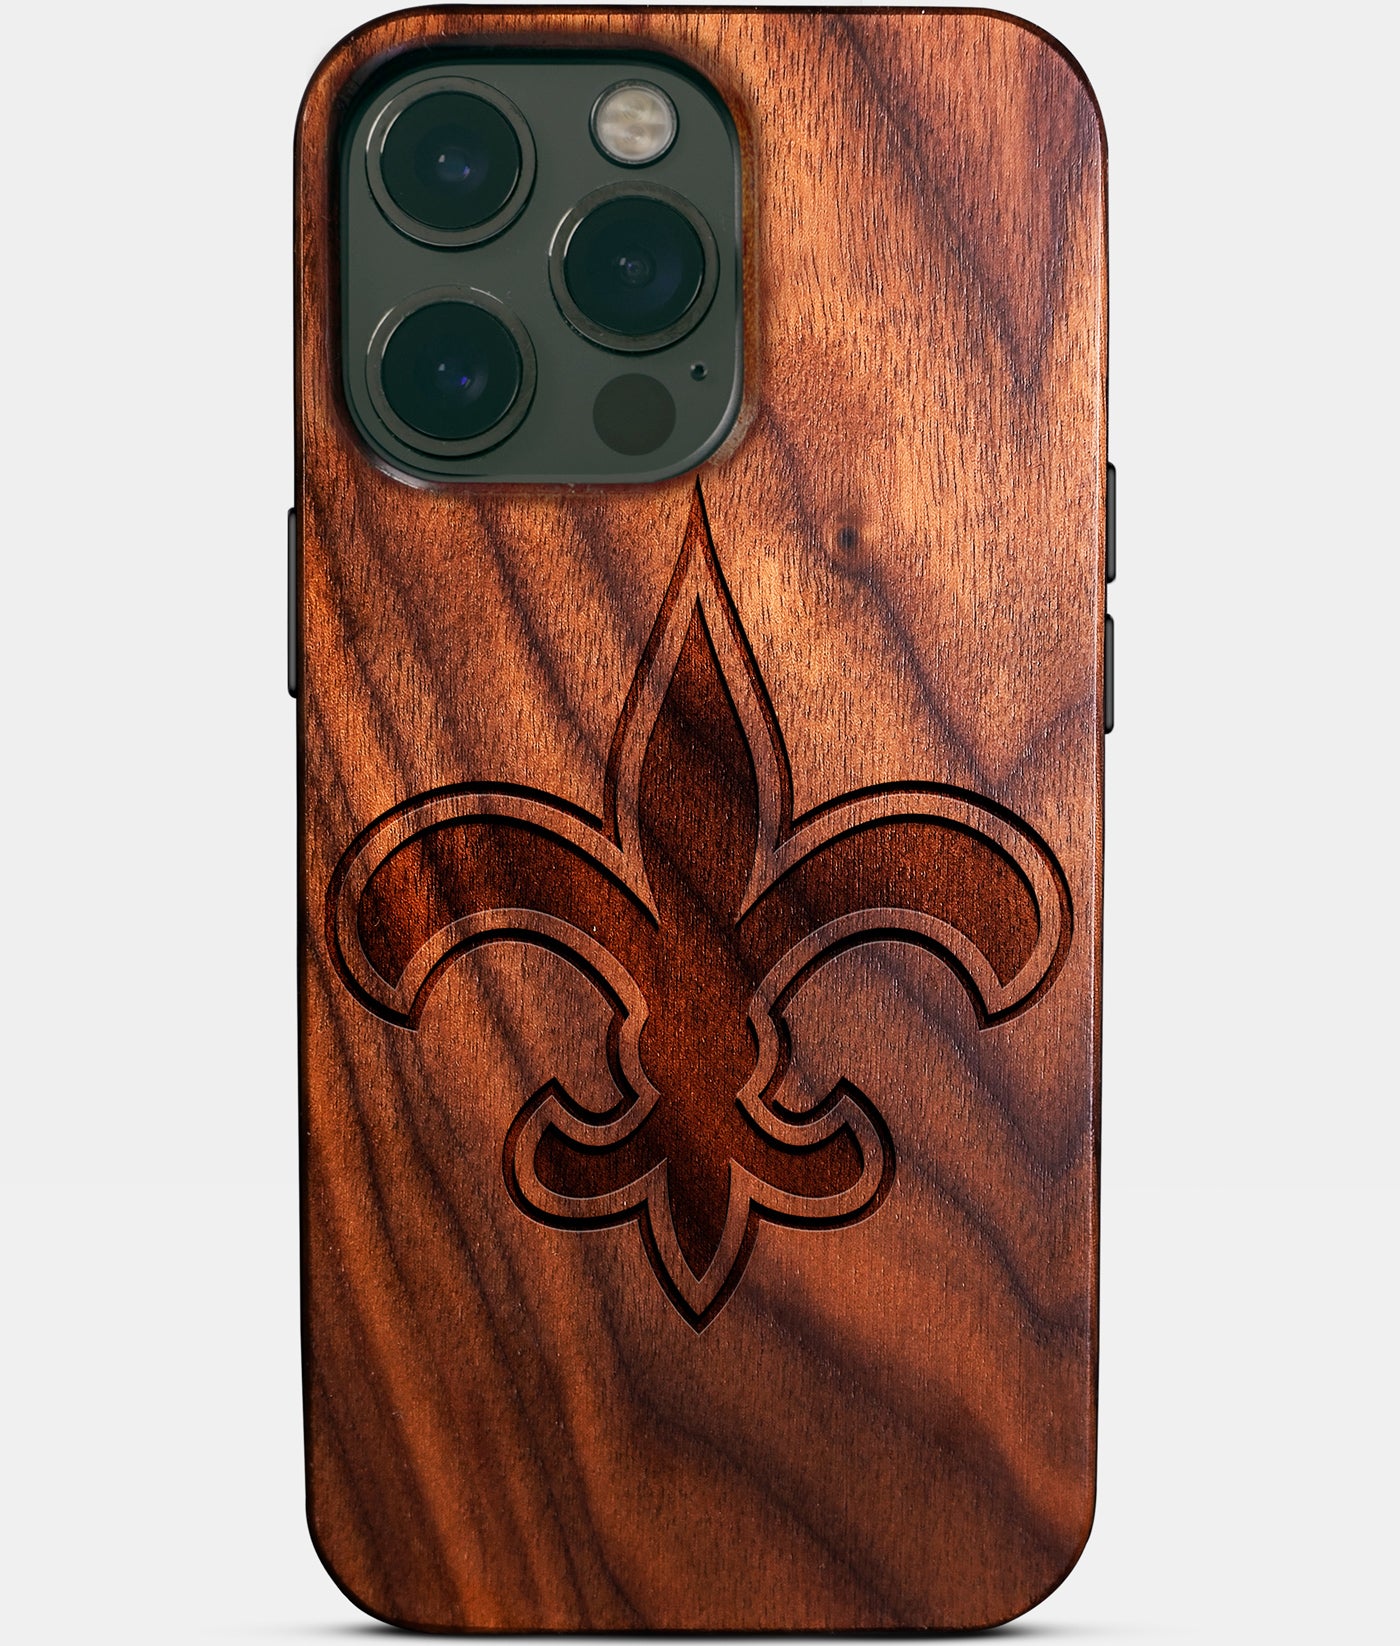 Custom New Orleans Saints iPhone 14/14 Pro/14 Pro Max/14 Plus Case - Carved Wood Saints Cover - Eco-friendly New Orleans Saints iPhone 14 Case - Custom New Orleans Saints Gift For Him - Monogrammed Personalized iPhone 14 Cover By Engraved In Nature